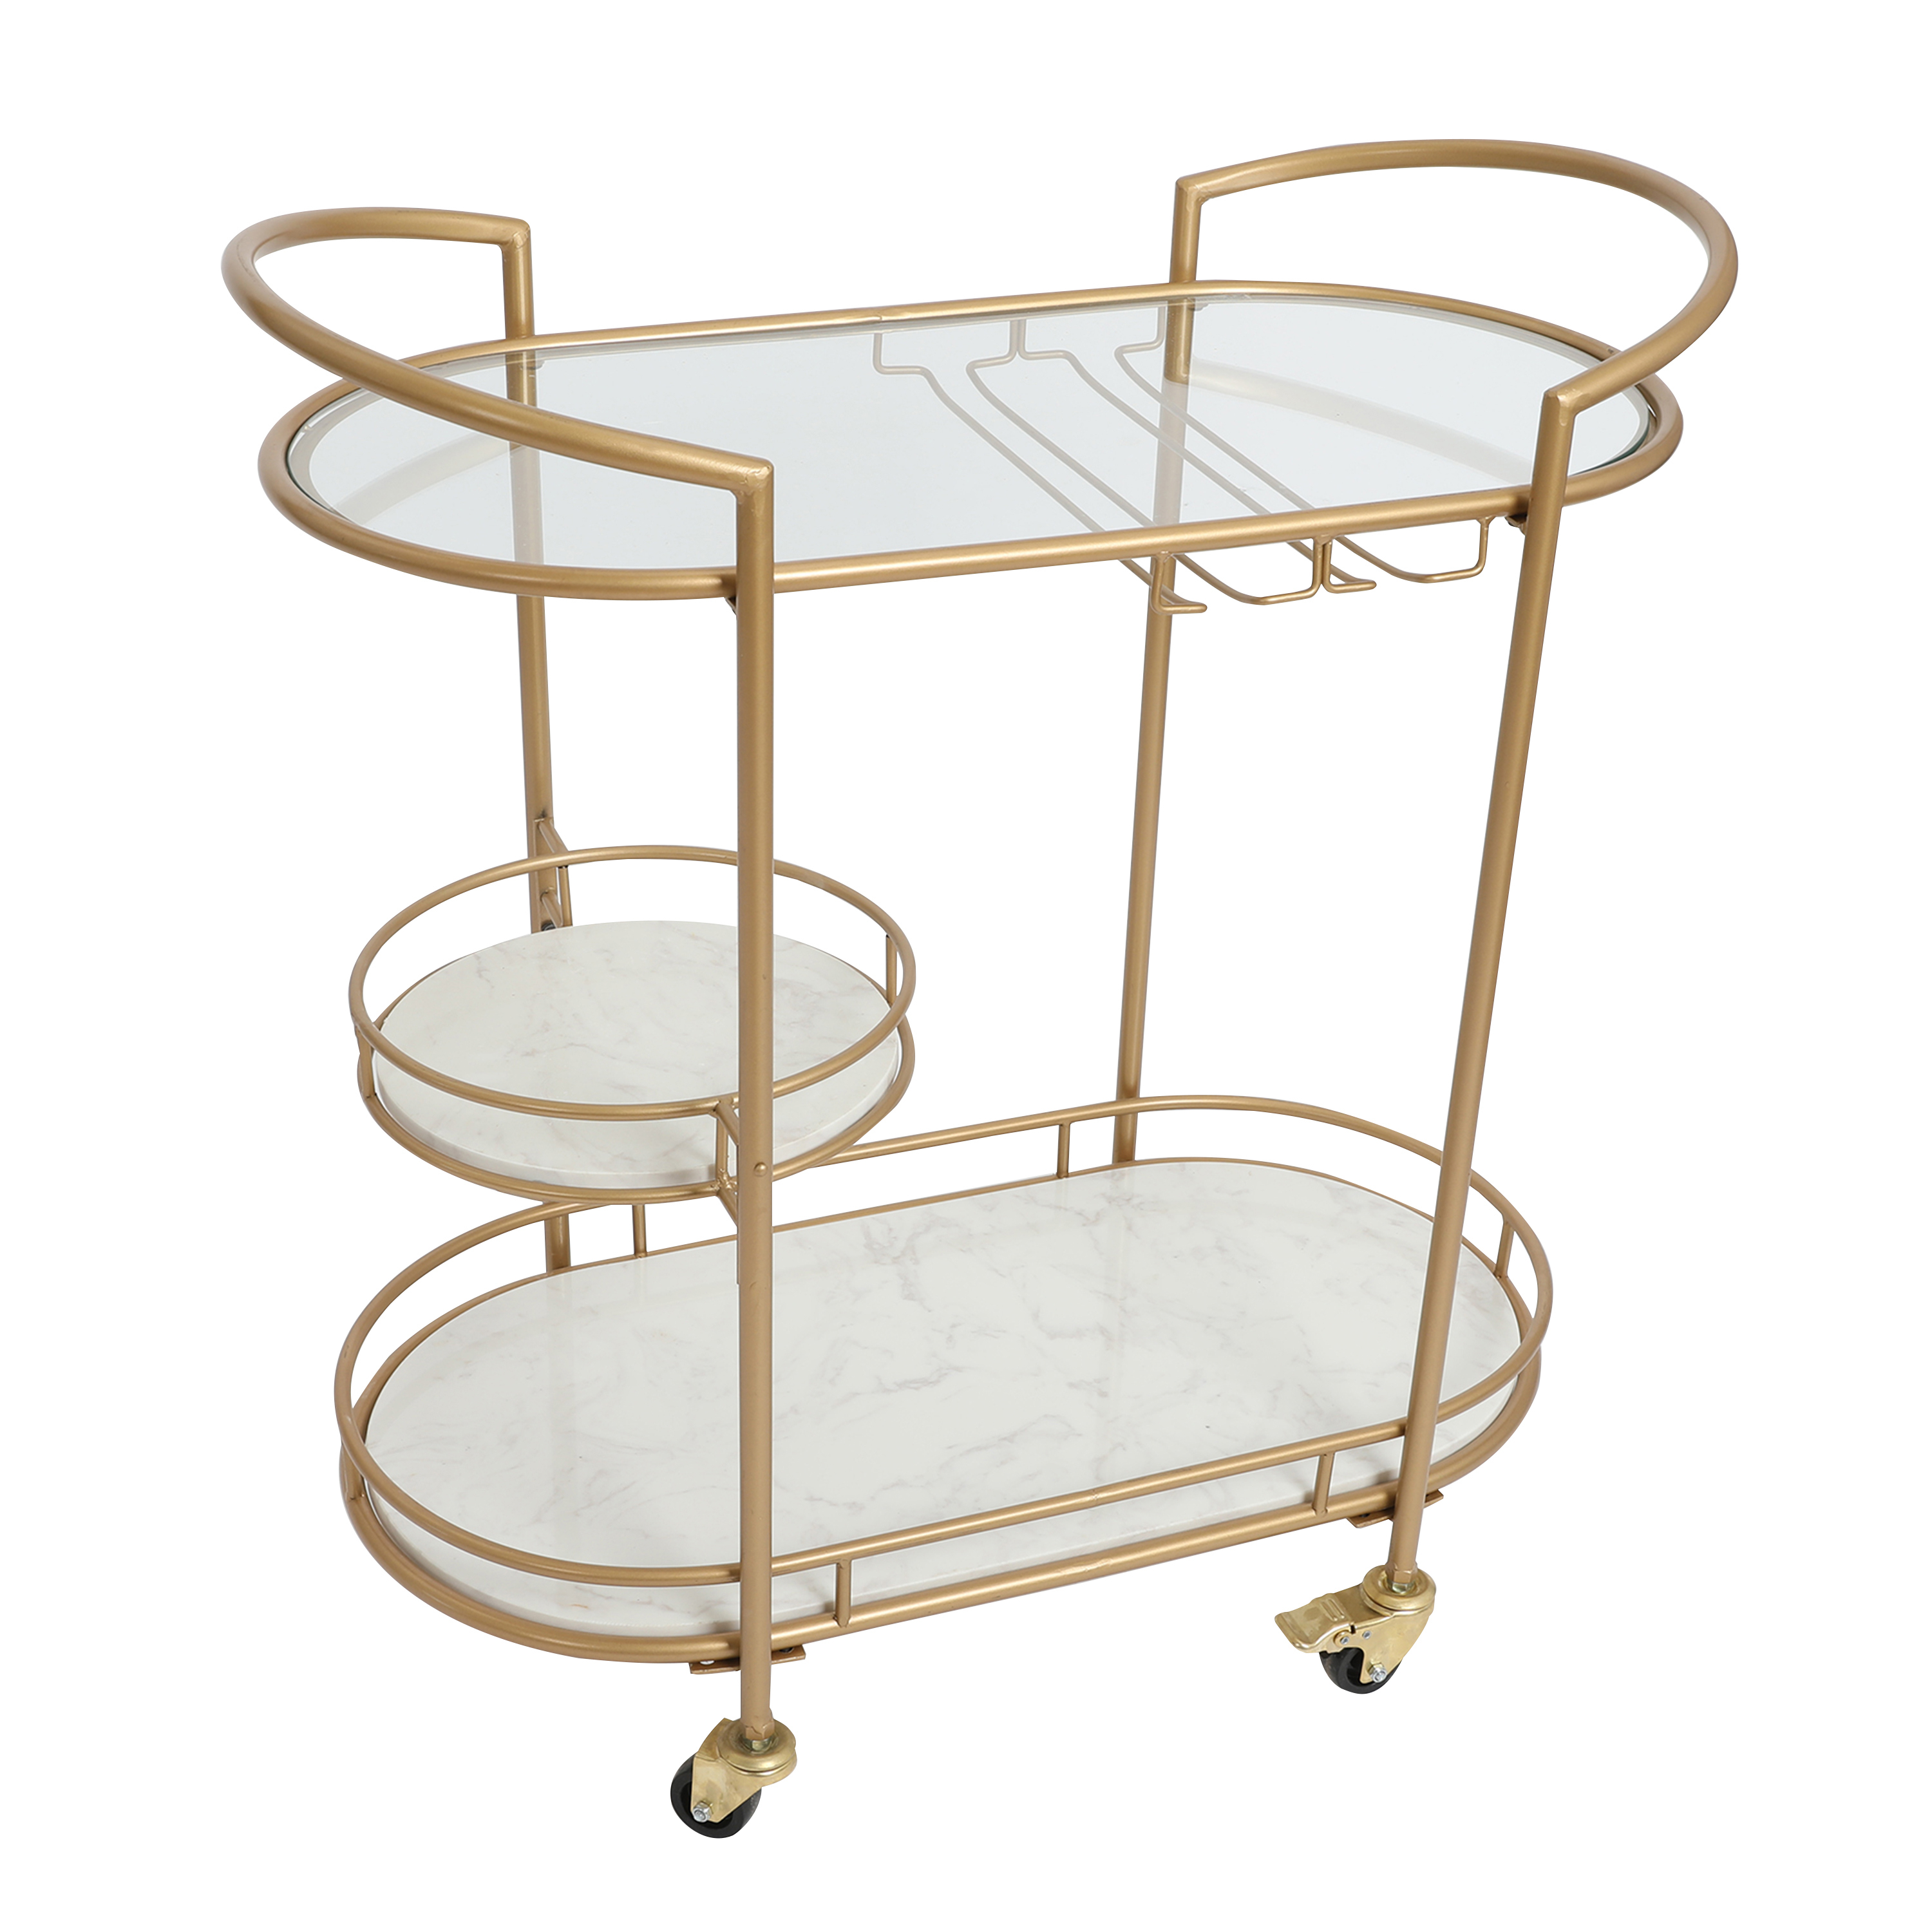 33 Inch Serving Cart, 3 Tier Glass And Marble Shelves, Gold Iron Frame, Lockable Casters - Saltoro Sherpi